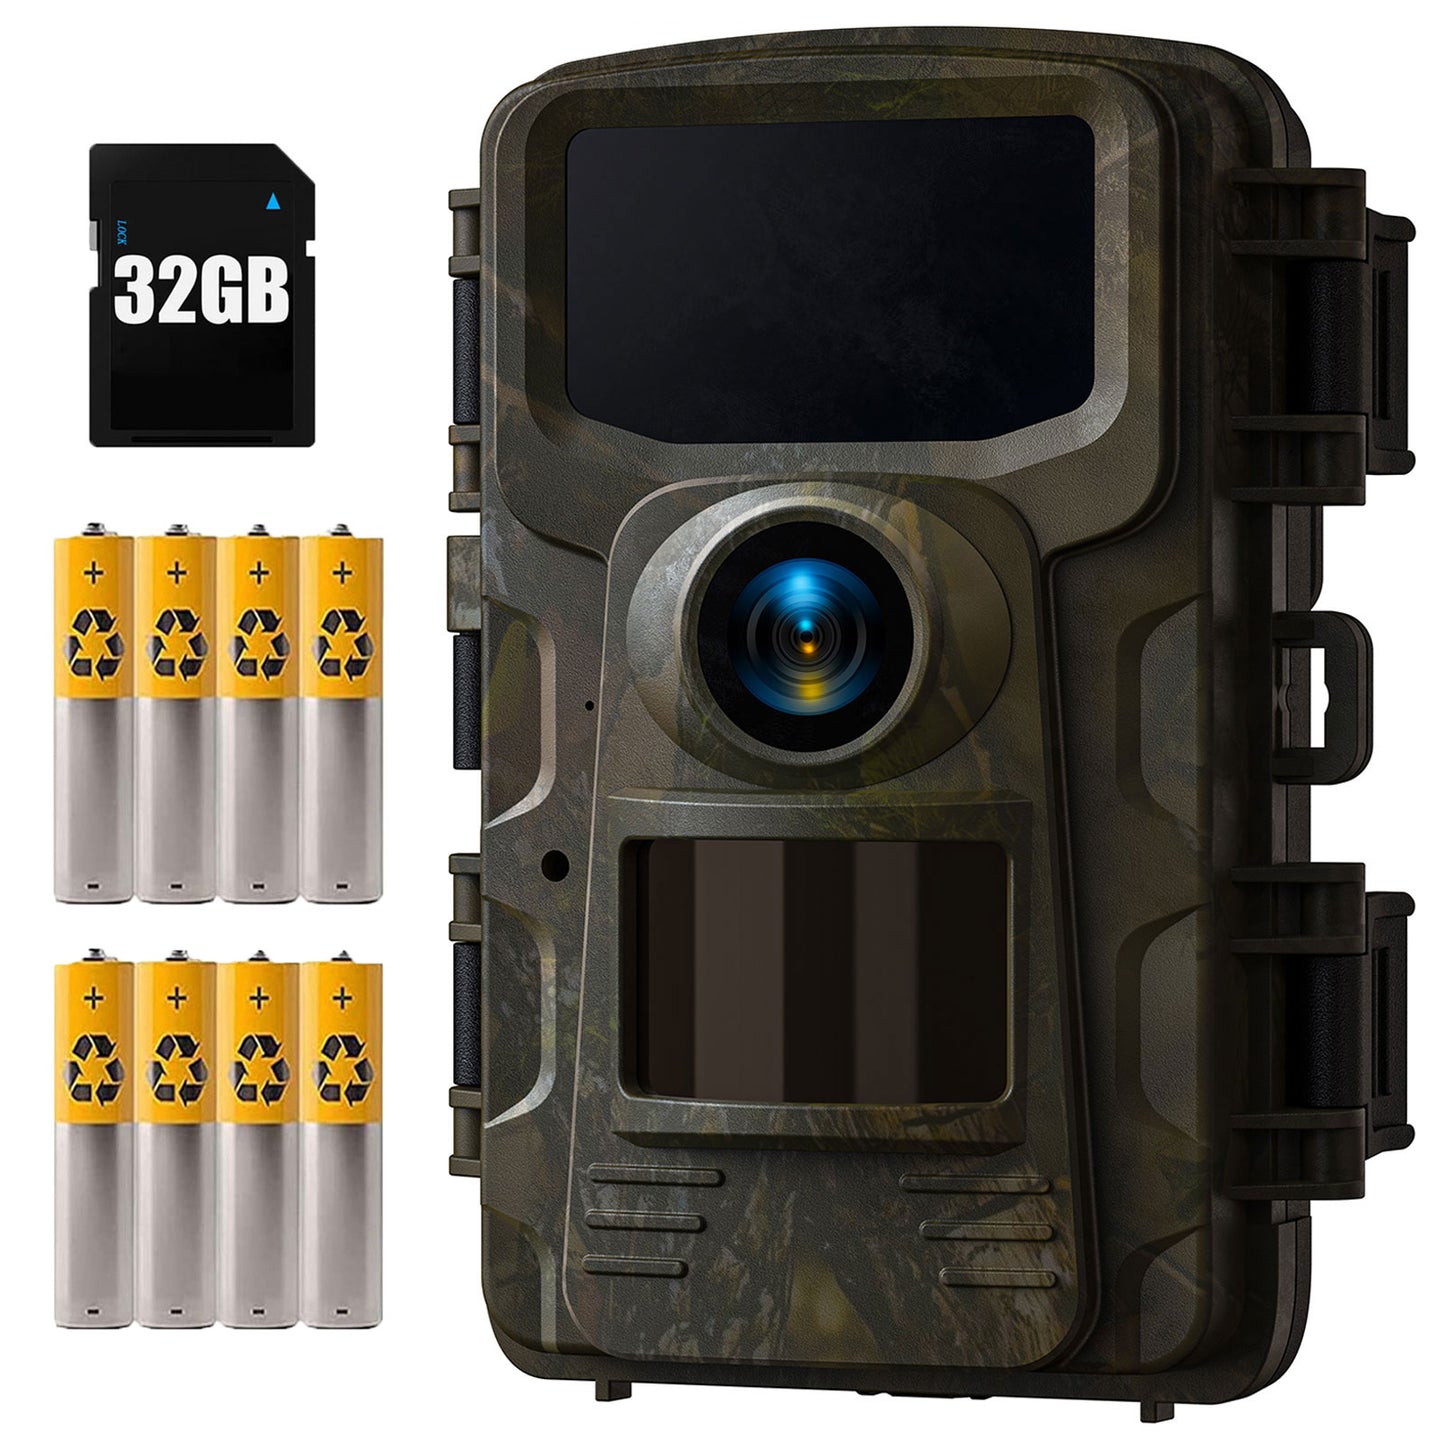 CAMPARK Trail Camera with SD Card and Batteries 1080P 24MP Game Camera with Night Vision Motion Activated Fast Trigger Time IP66 Waterproof 2.0"LCD Hunting Deer Trail Cam for Wildlife Monitoring